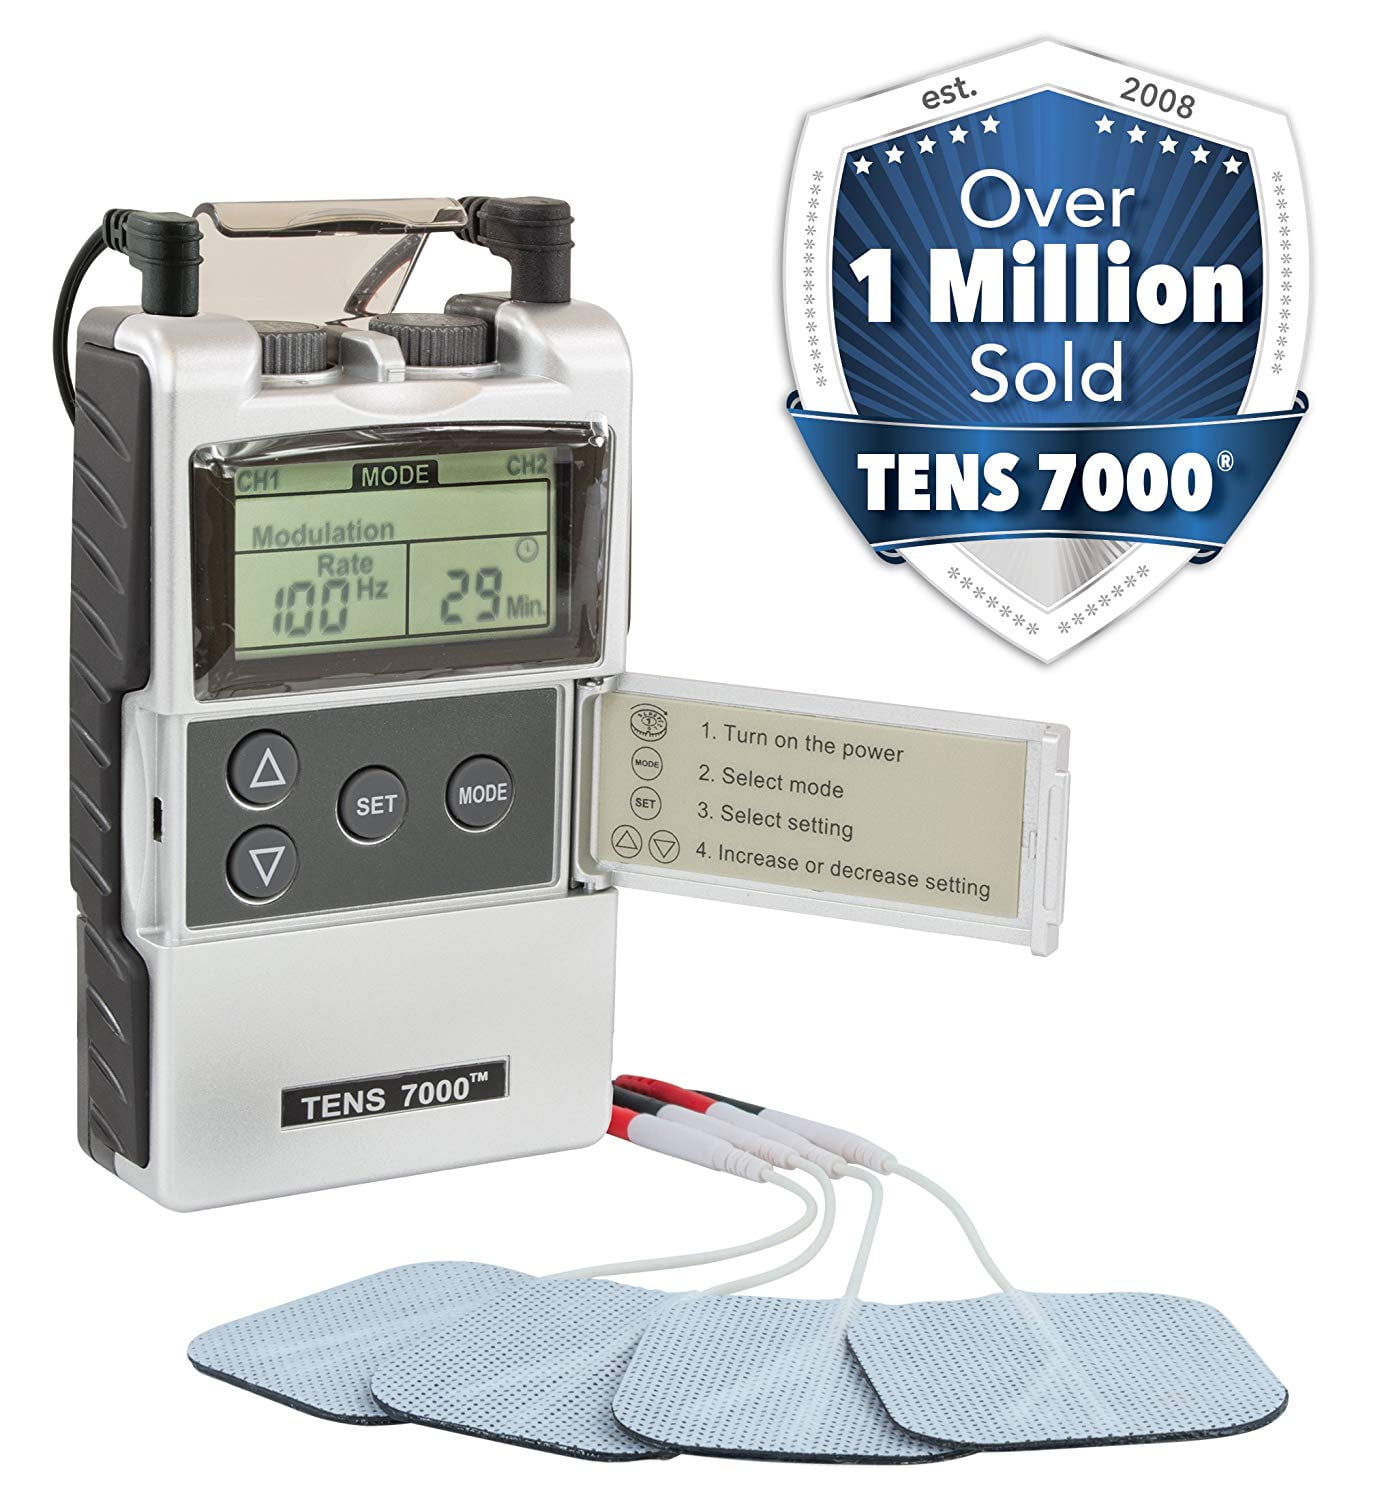 TENS Therapy for Back Pain Relief – TENS 7000